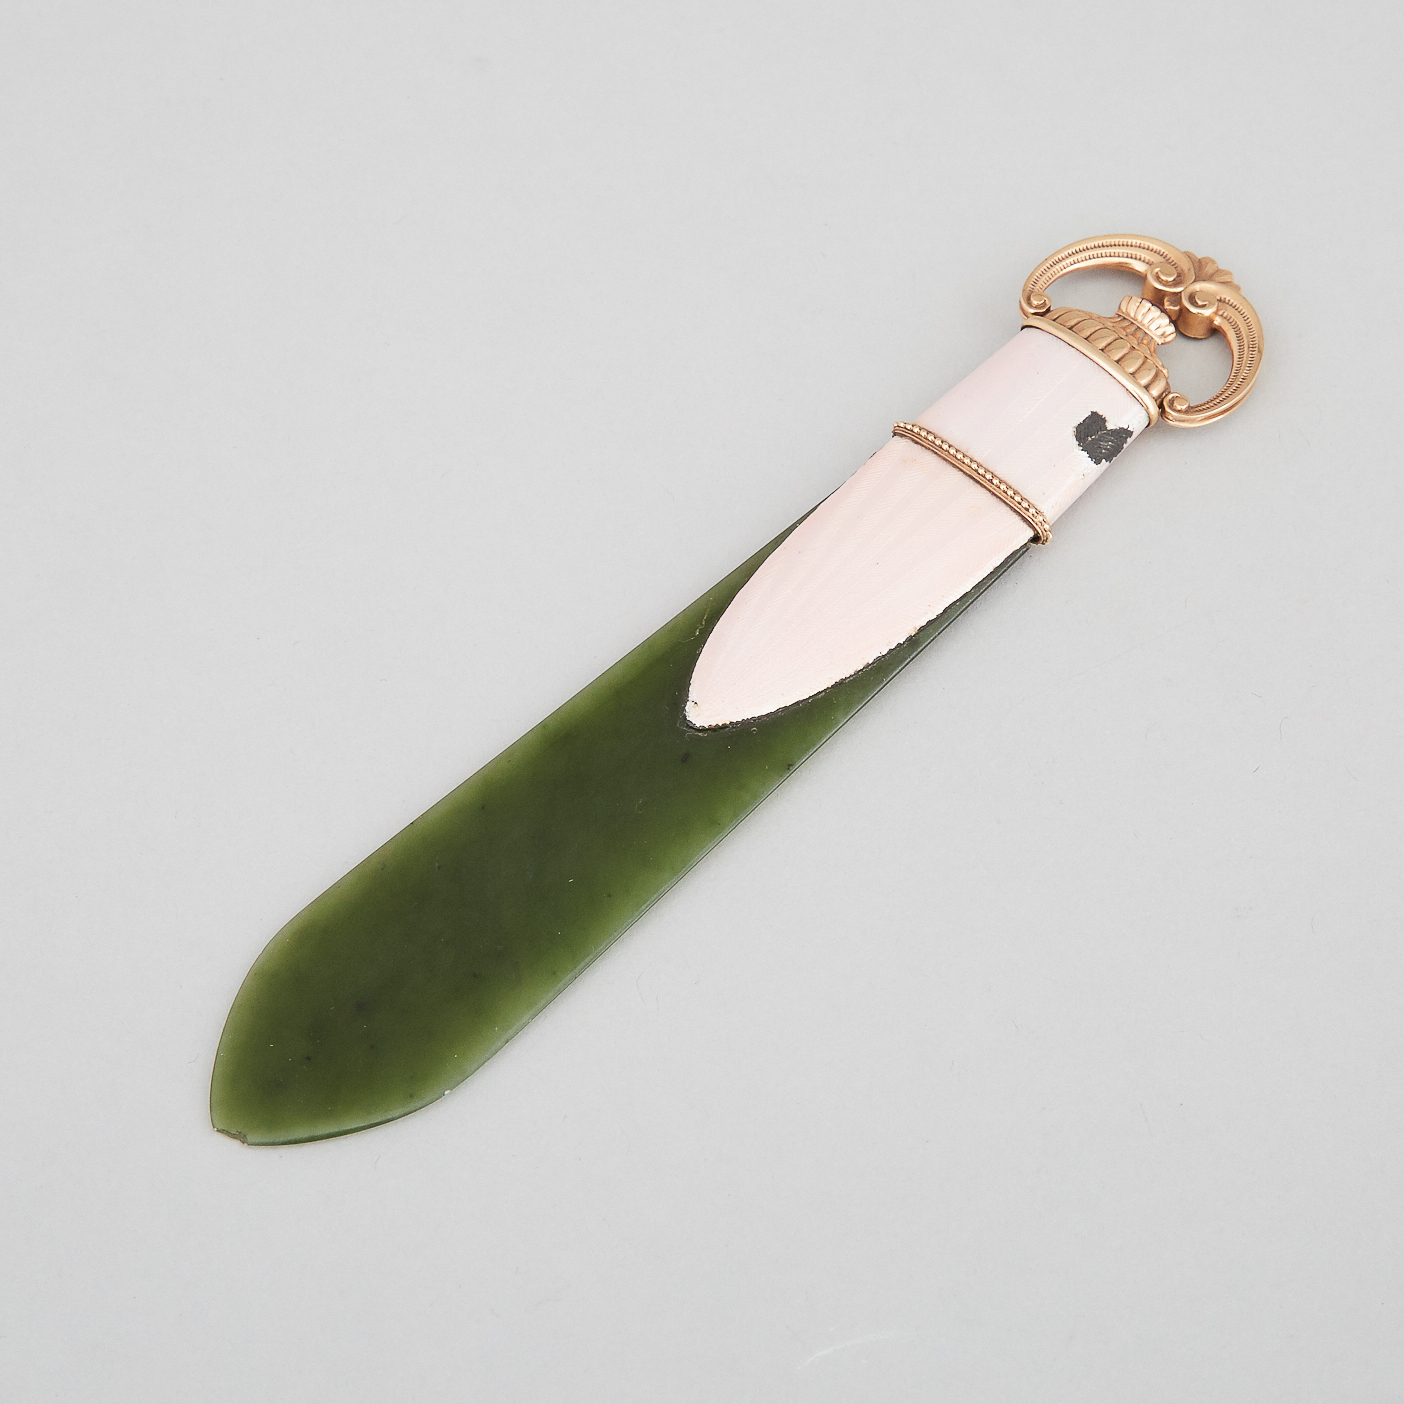 Russian Yellow Gold and Translucent Pink Enamel Mounted Nephrite Jade Letter Opener, 20th century